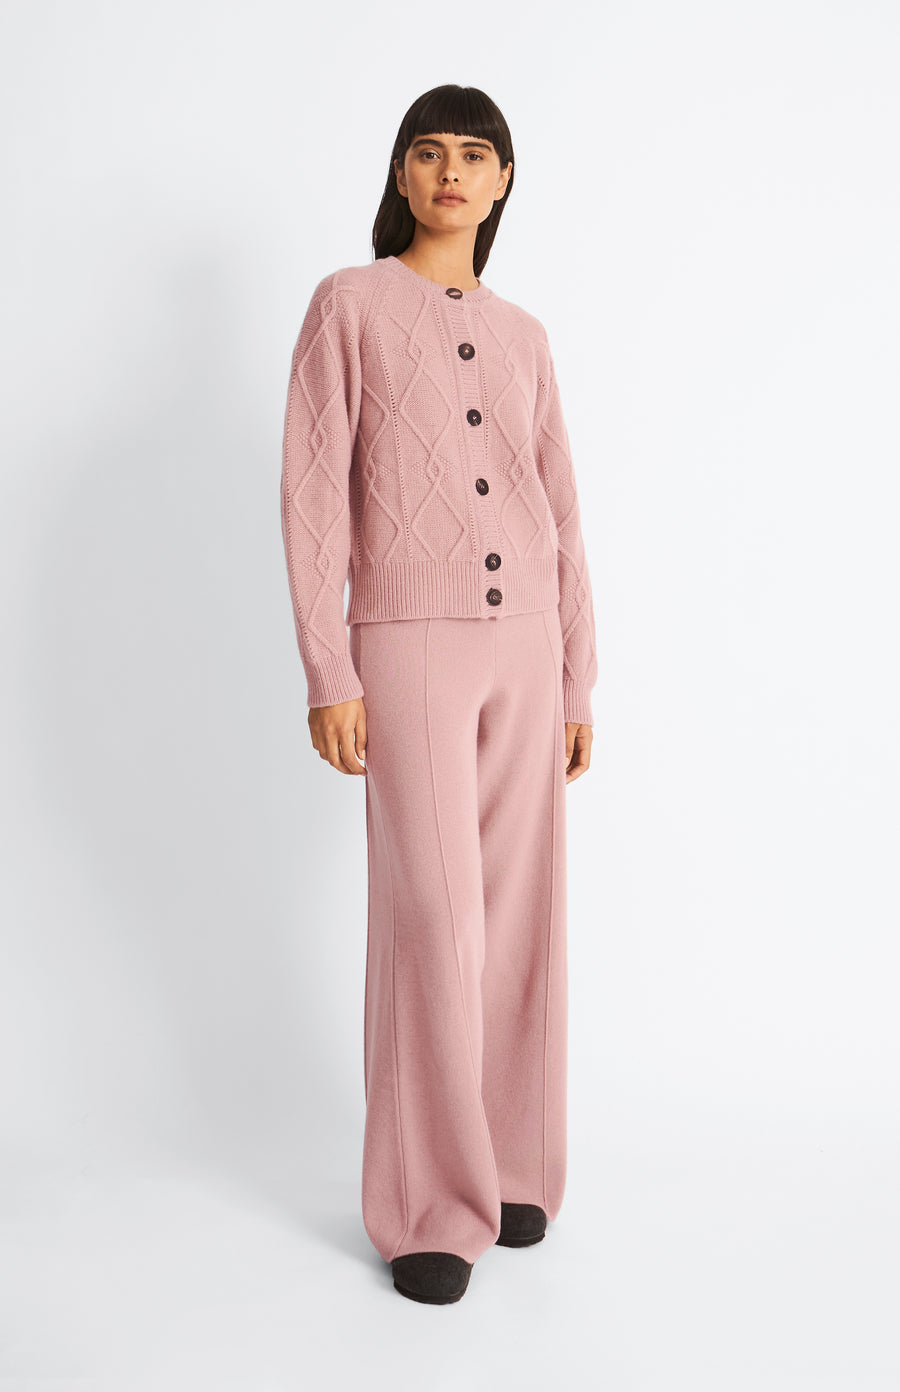 Pringle Multi Texture Cashmere blend cardigan in Dusty Pink on mode with matching trousers